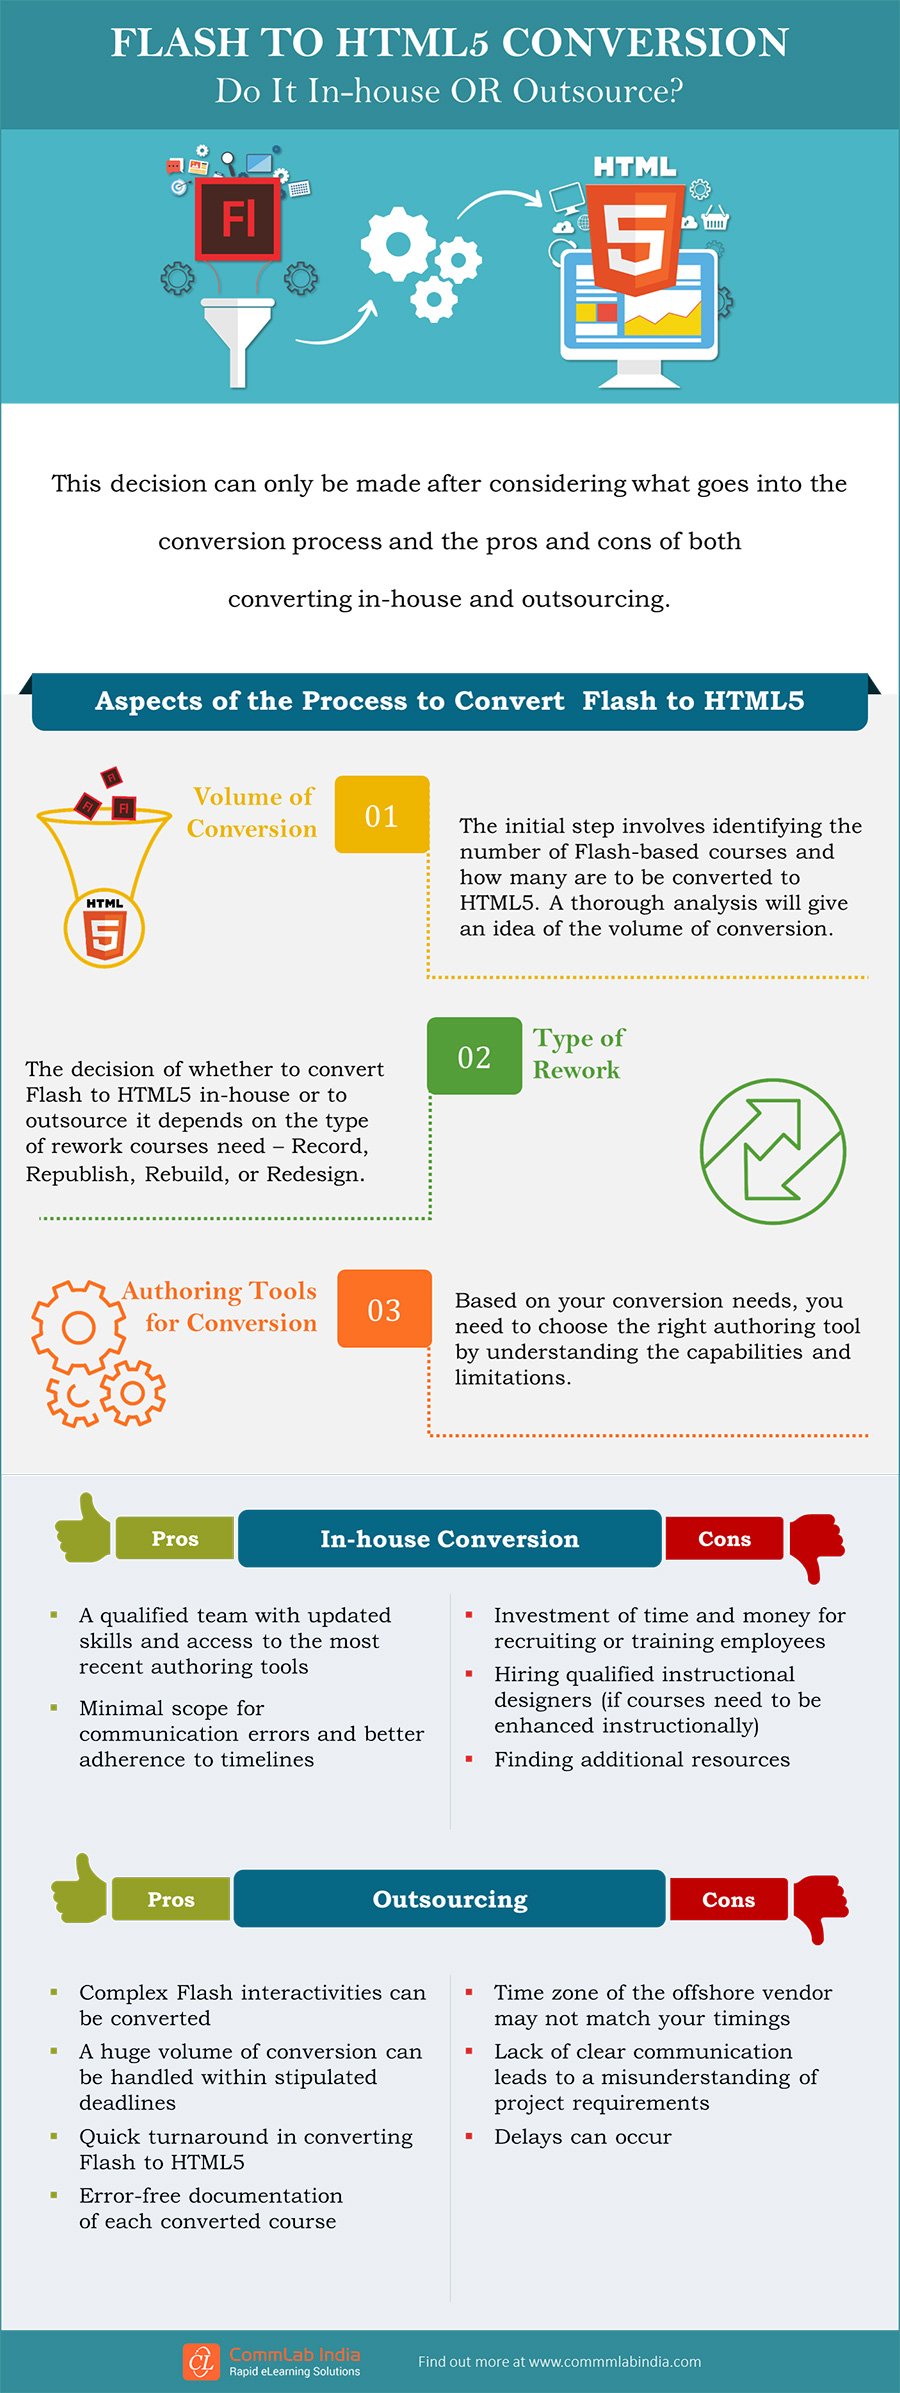 Flash to HTML5 Conversion – In-house or Outsource? [Infographic]